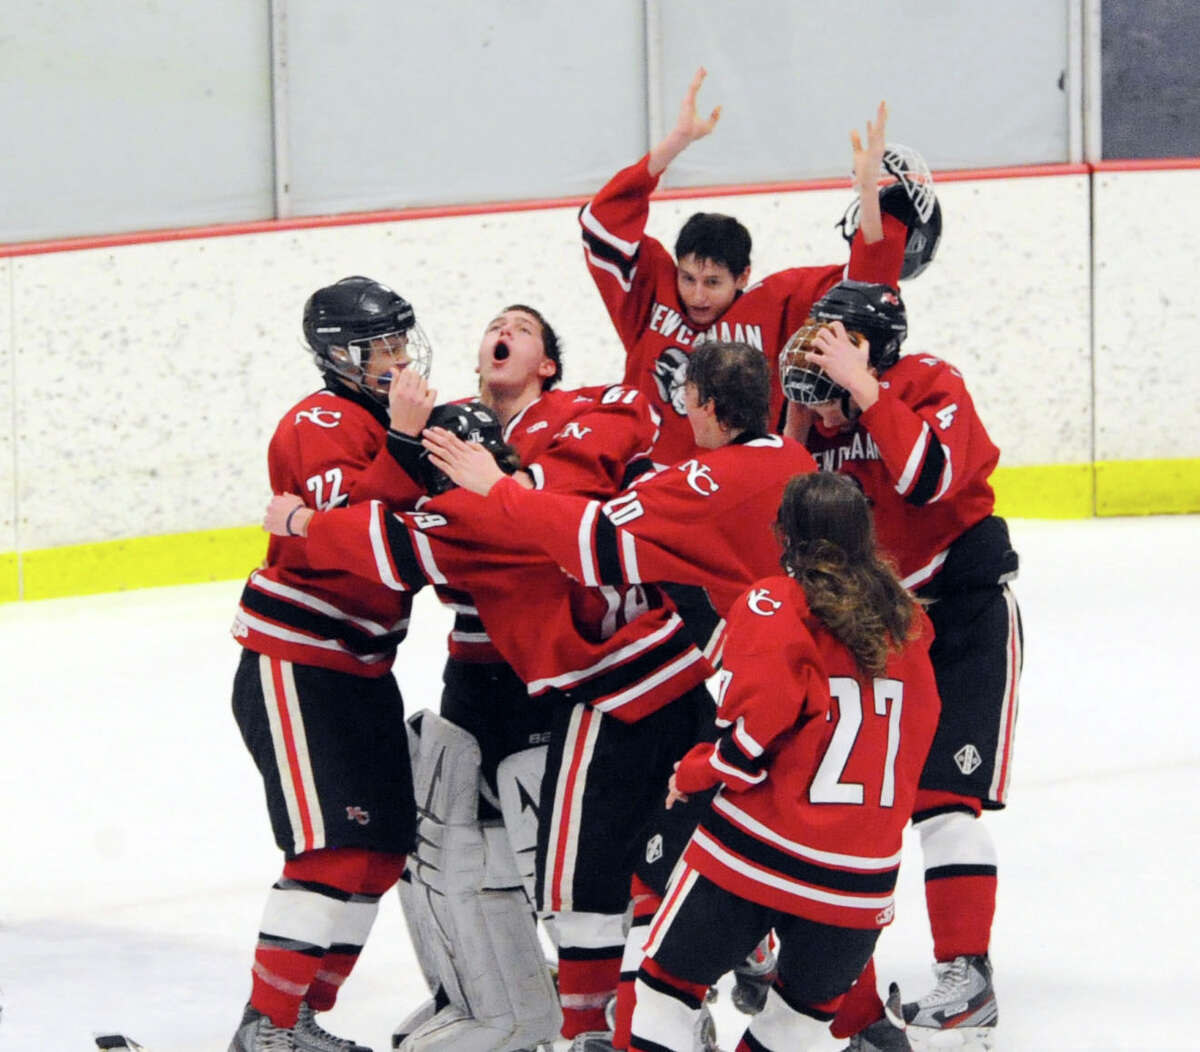 New Canaan goalie MacLean Wright, second from left, screams as he is surrounded by teammates at the conclusion of a 5-2 victory over Darien as New Canaan won the FCIAC boys hockey championship game at Terry Conners Rink in Stamford, Saturday, March 8, 2014. New Canaan players are Pat Hompe (#22), left, James Franzis (#20) and Cooper Manchuck (#27), bottom right. Wright was named the MVP.